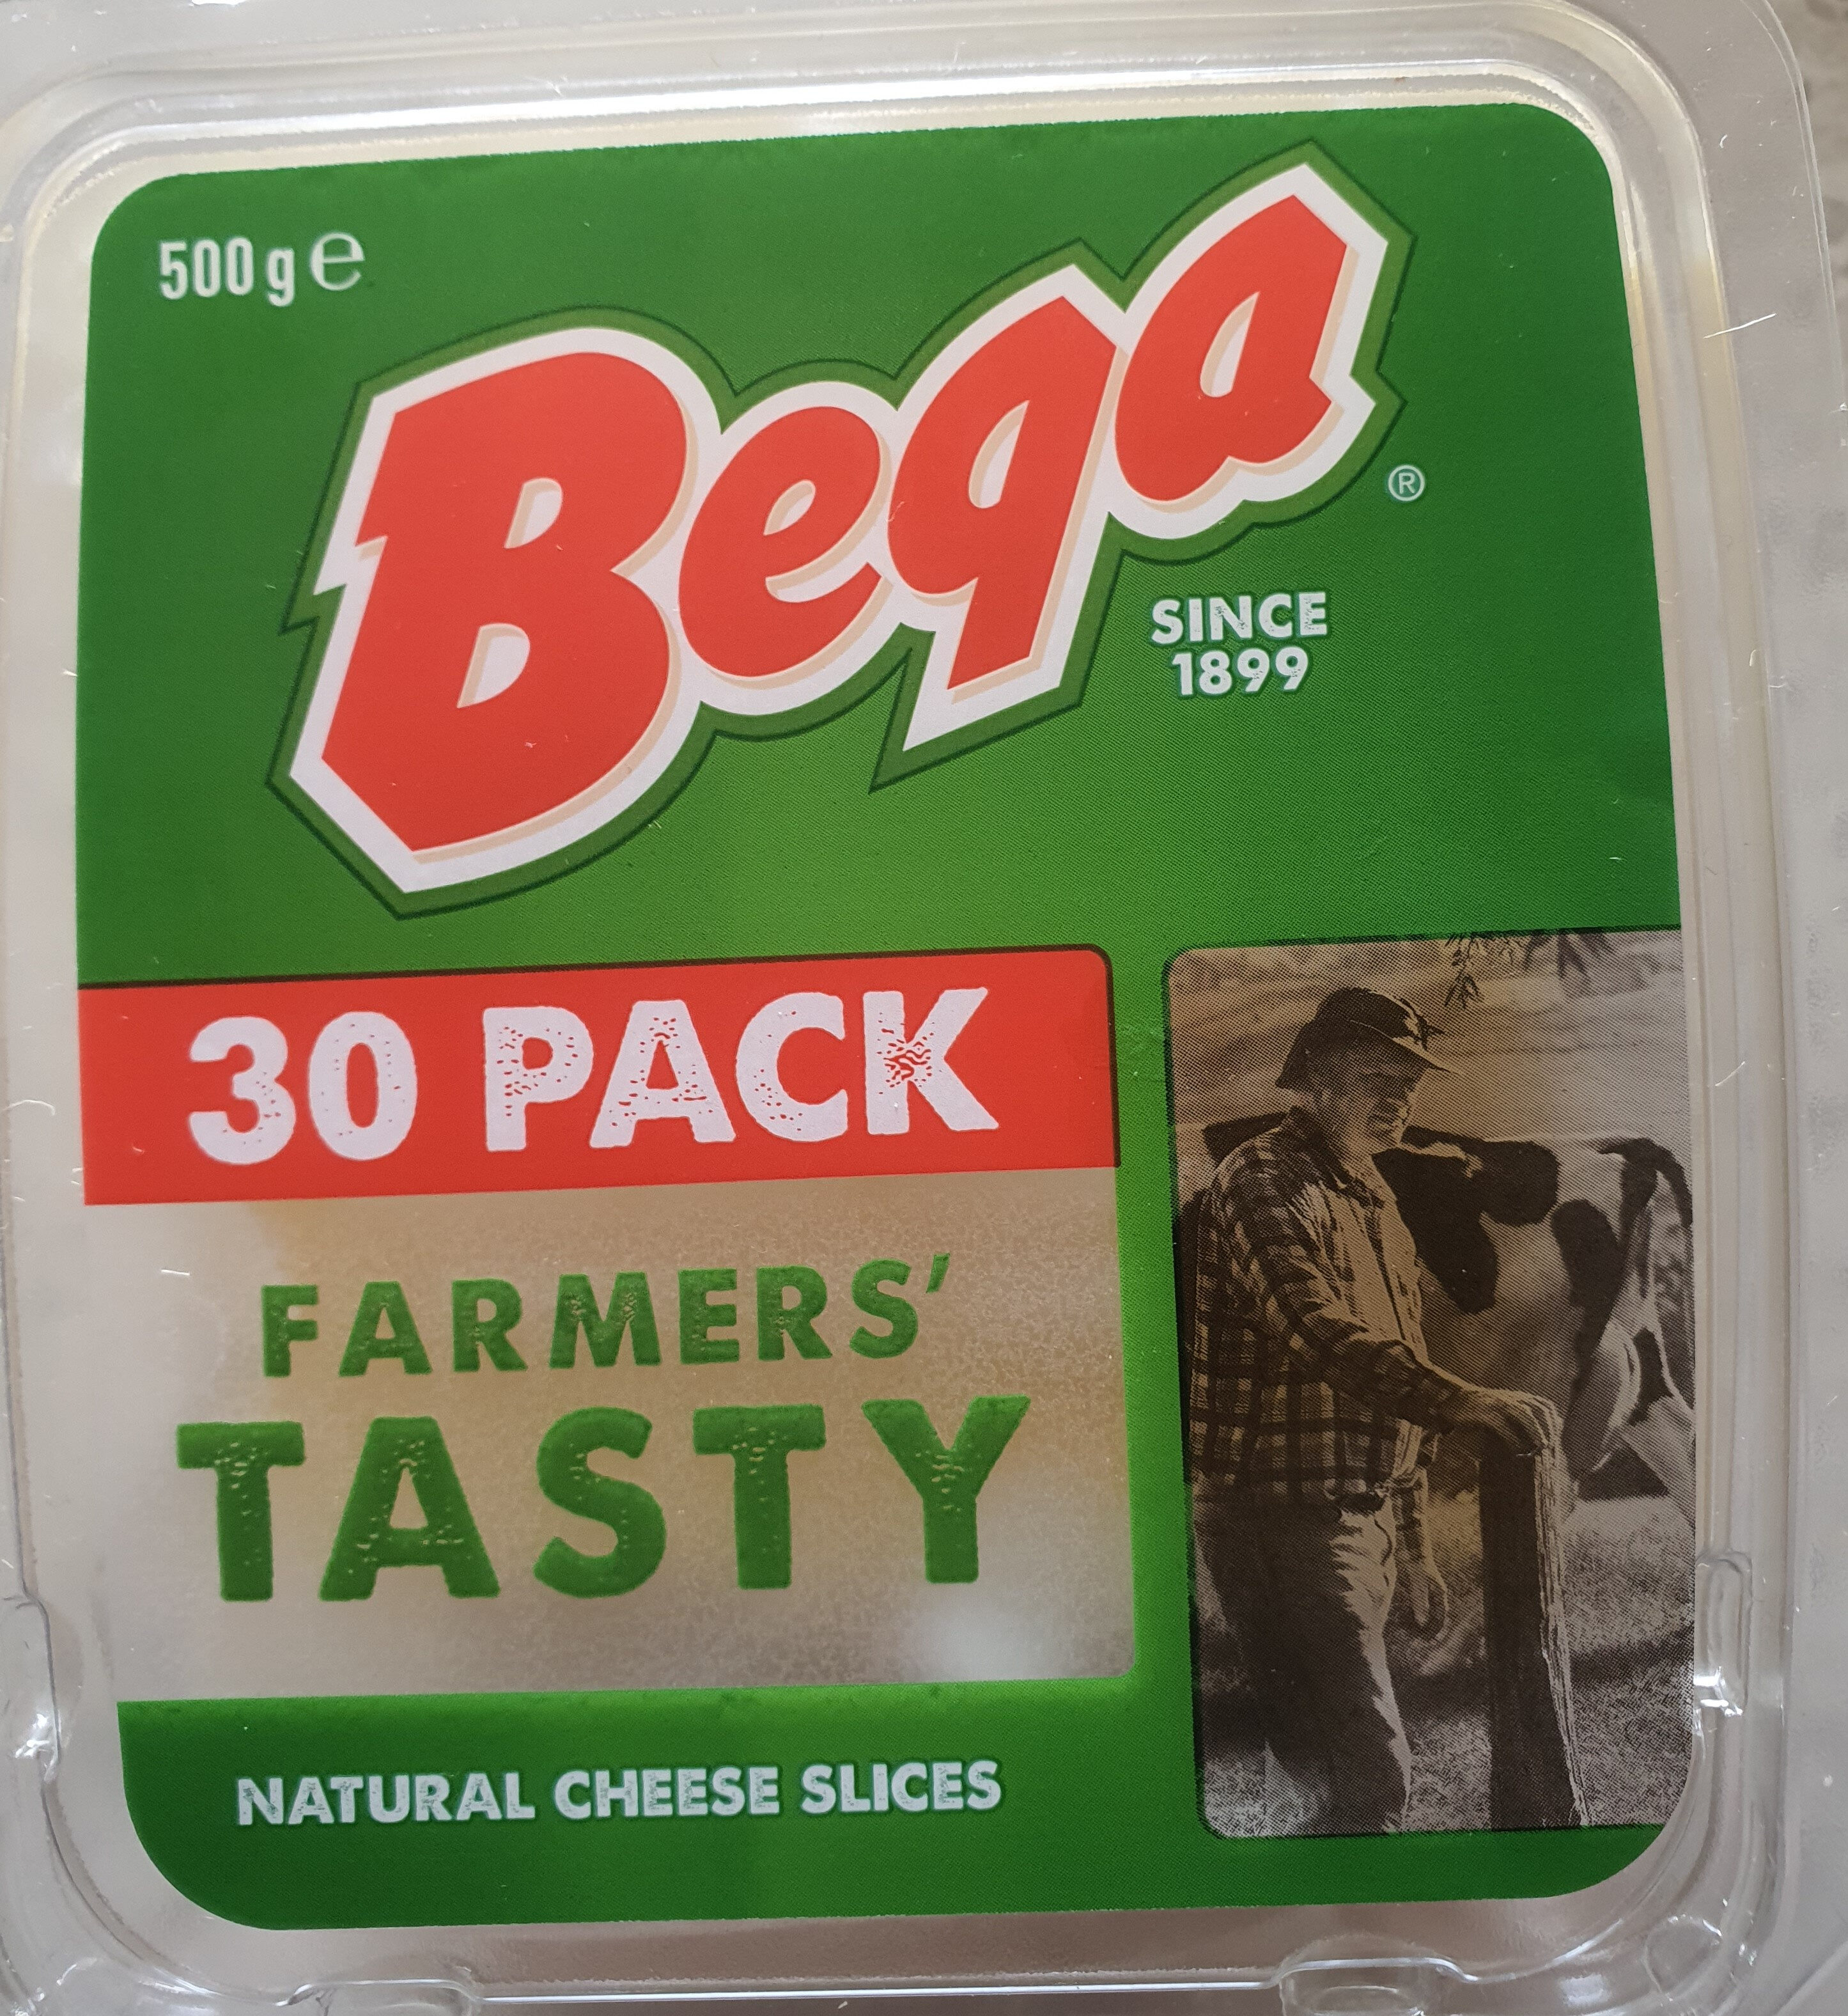 Bega Tasty cheese slices 30 pack - Product